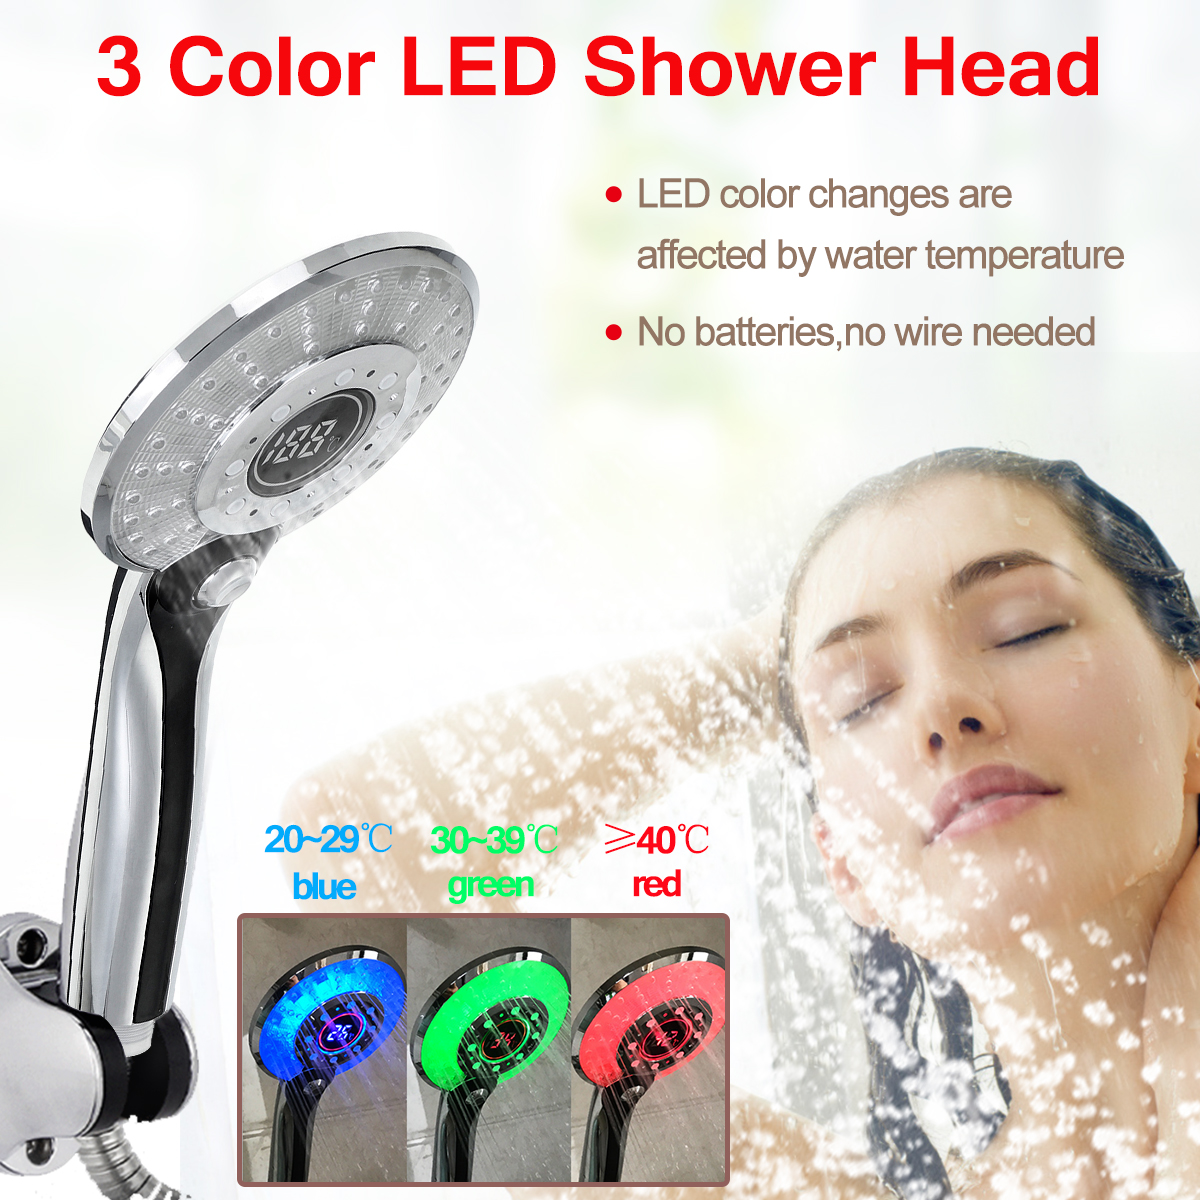 Bakeey-LED-Light-LCD-Display-Third-Gear-Water-Flow-Self-Illumination-Temperature-Control-Shower-Head-1606841-1